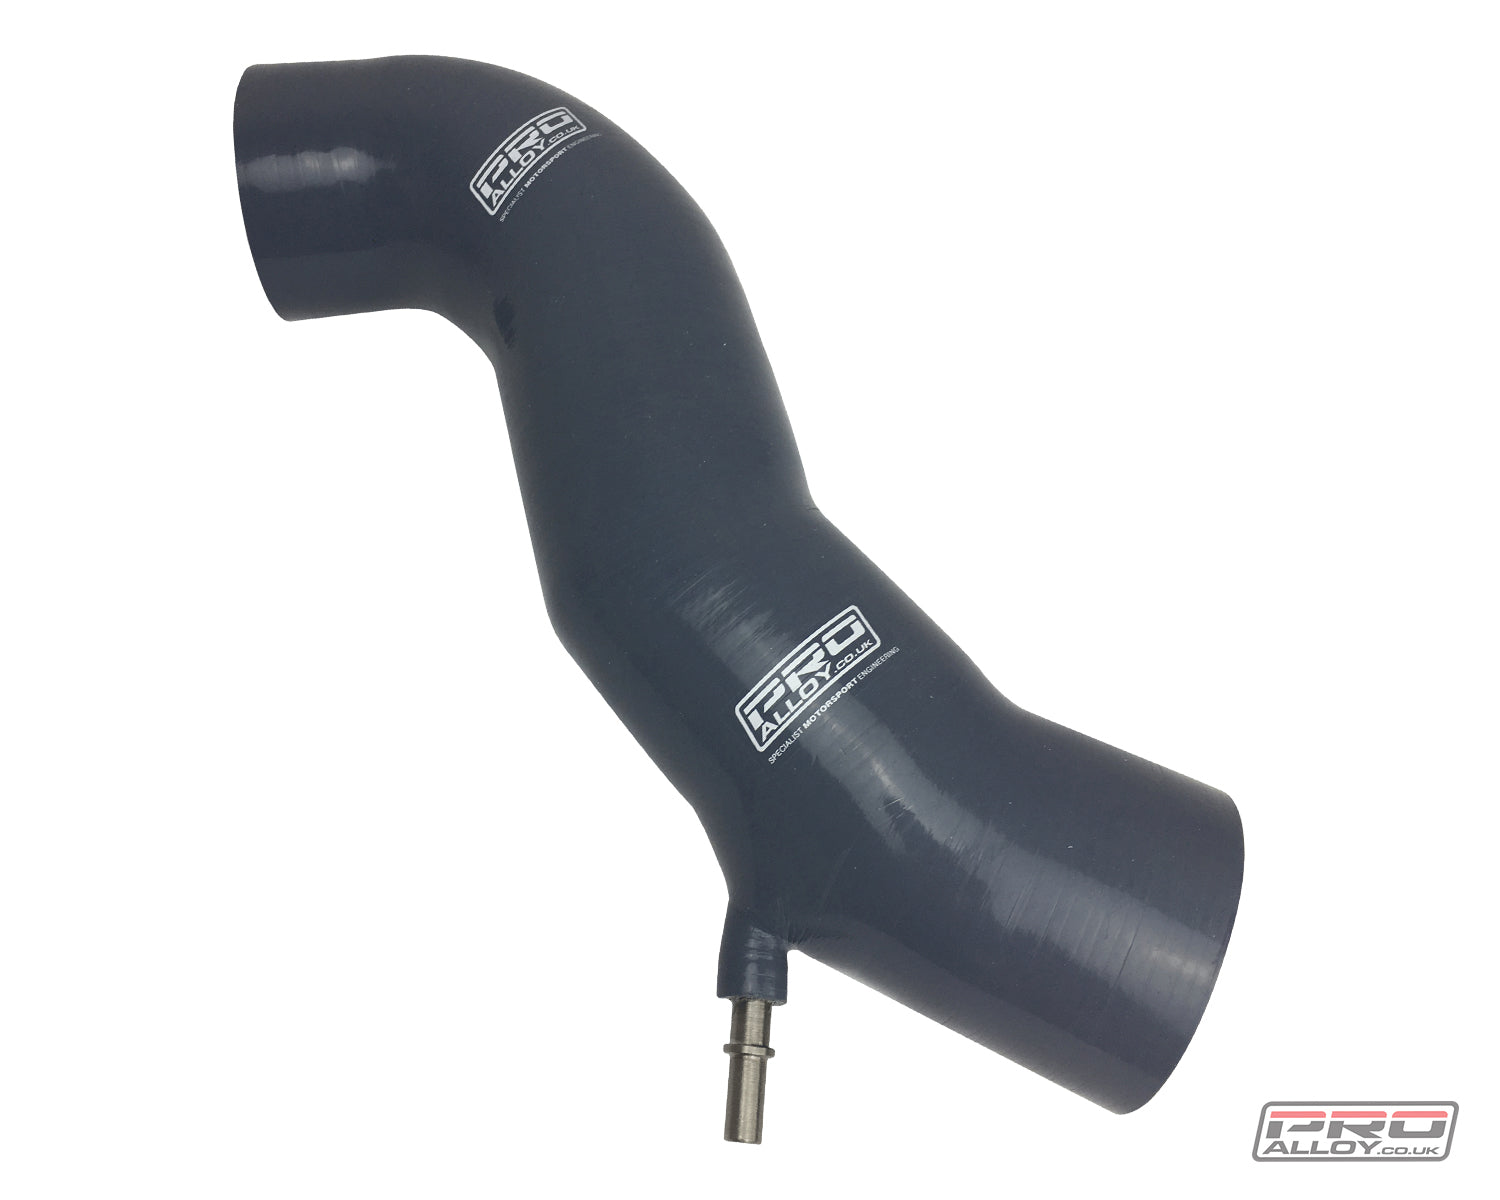 Fiesta ST MK7 Intake Silicone Hose - Stage 2 Silicone Hoses    - Pro Alloy